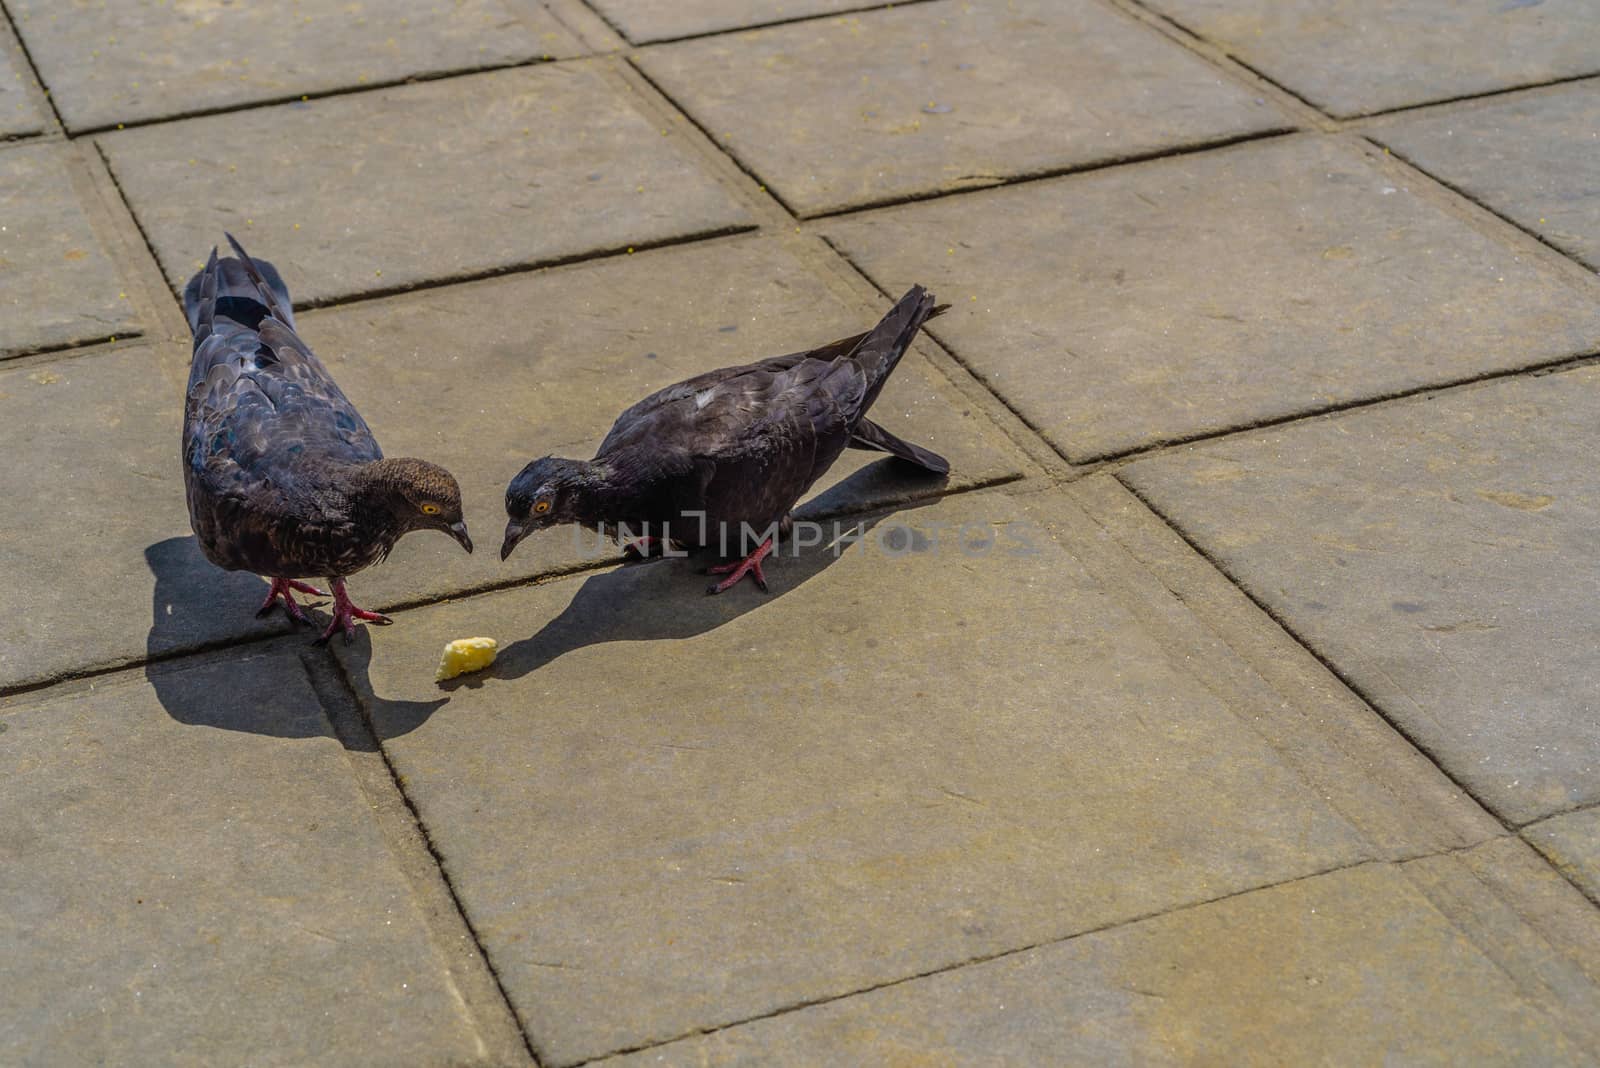 Two pigeons are looking at a piece of bread on the floor.